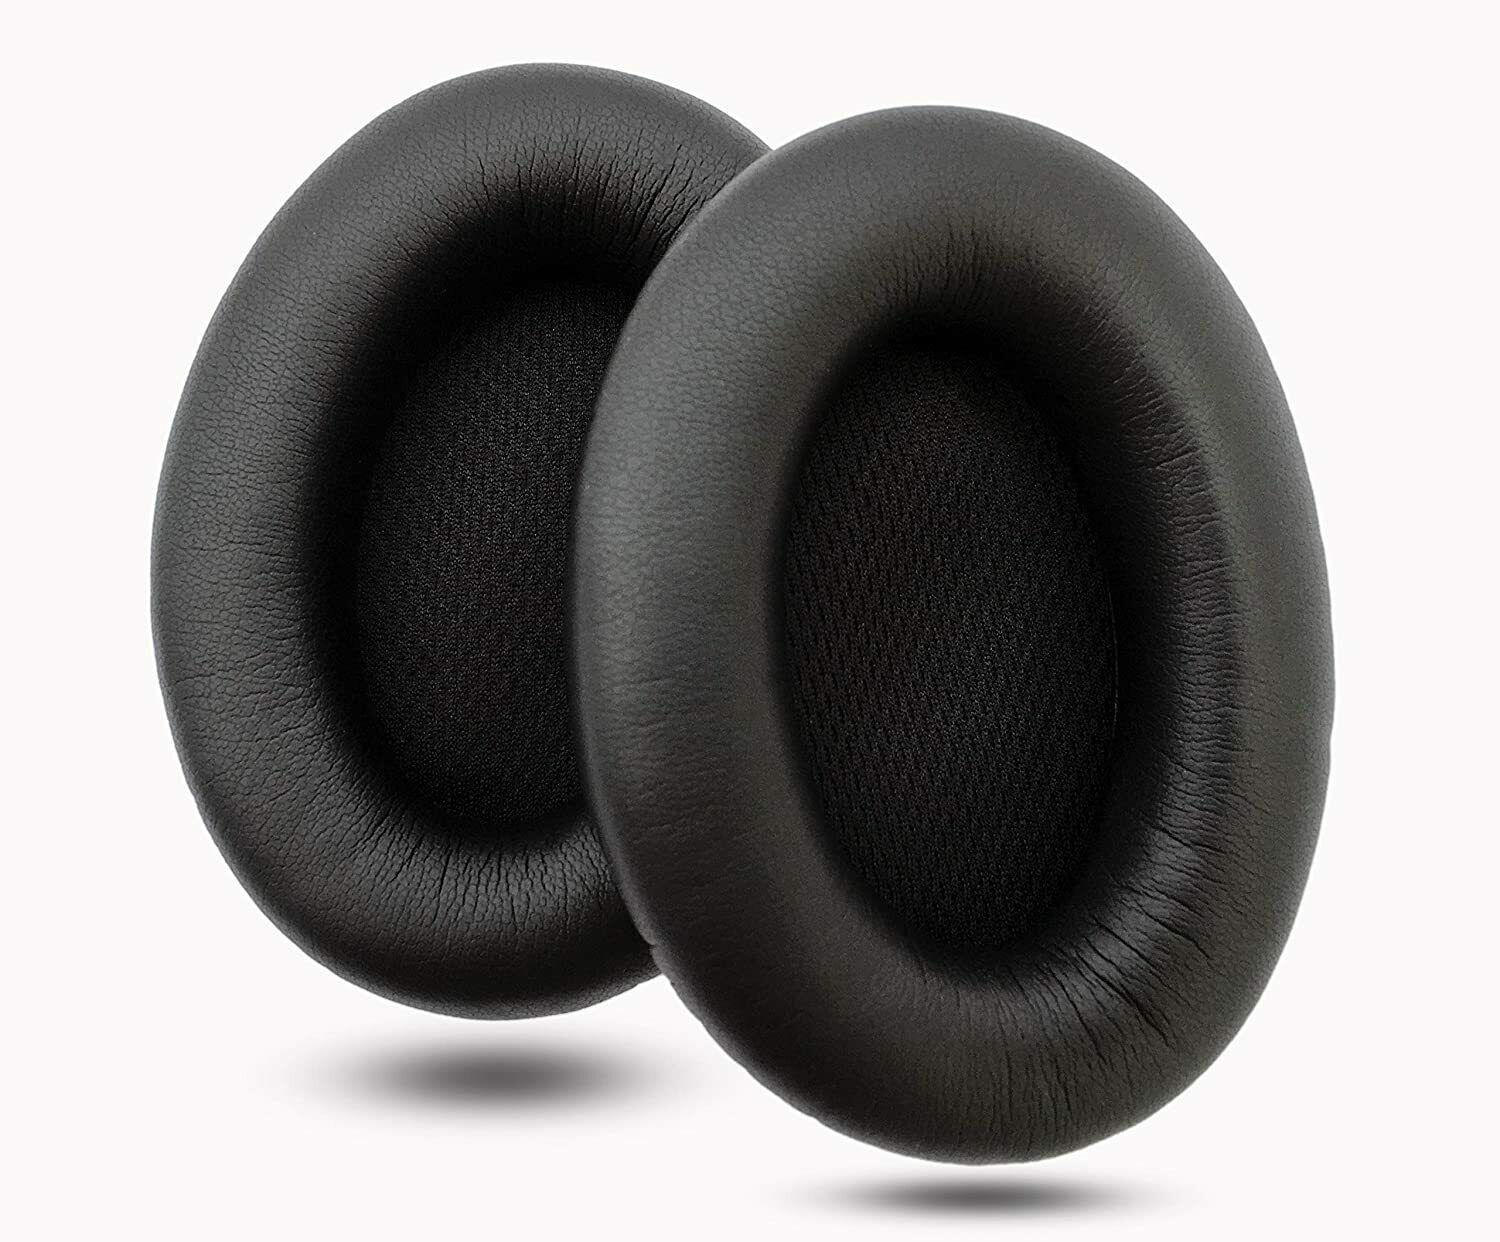 Headphone Replacement Ear Pads by AvimaBasics – Premium Cushions Cover Pads Ear - $12.18